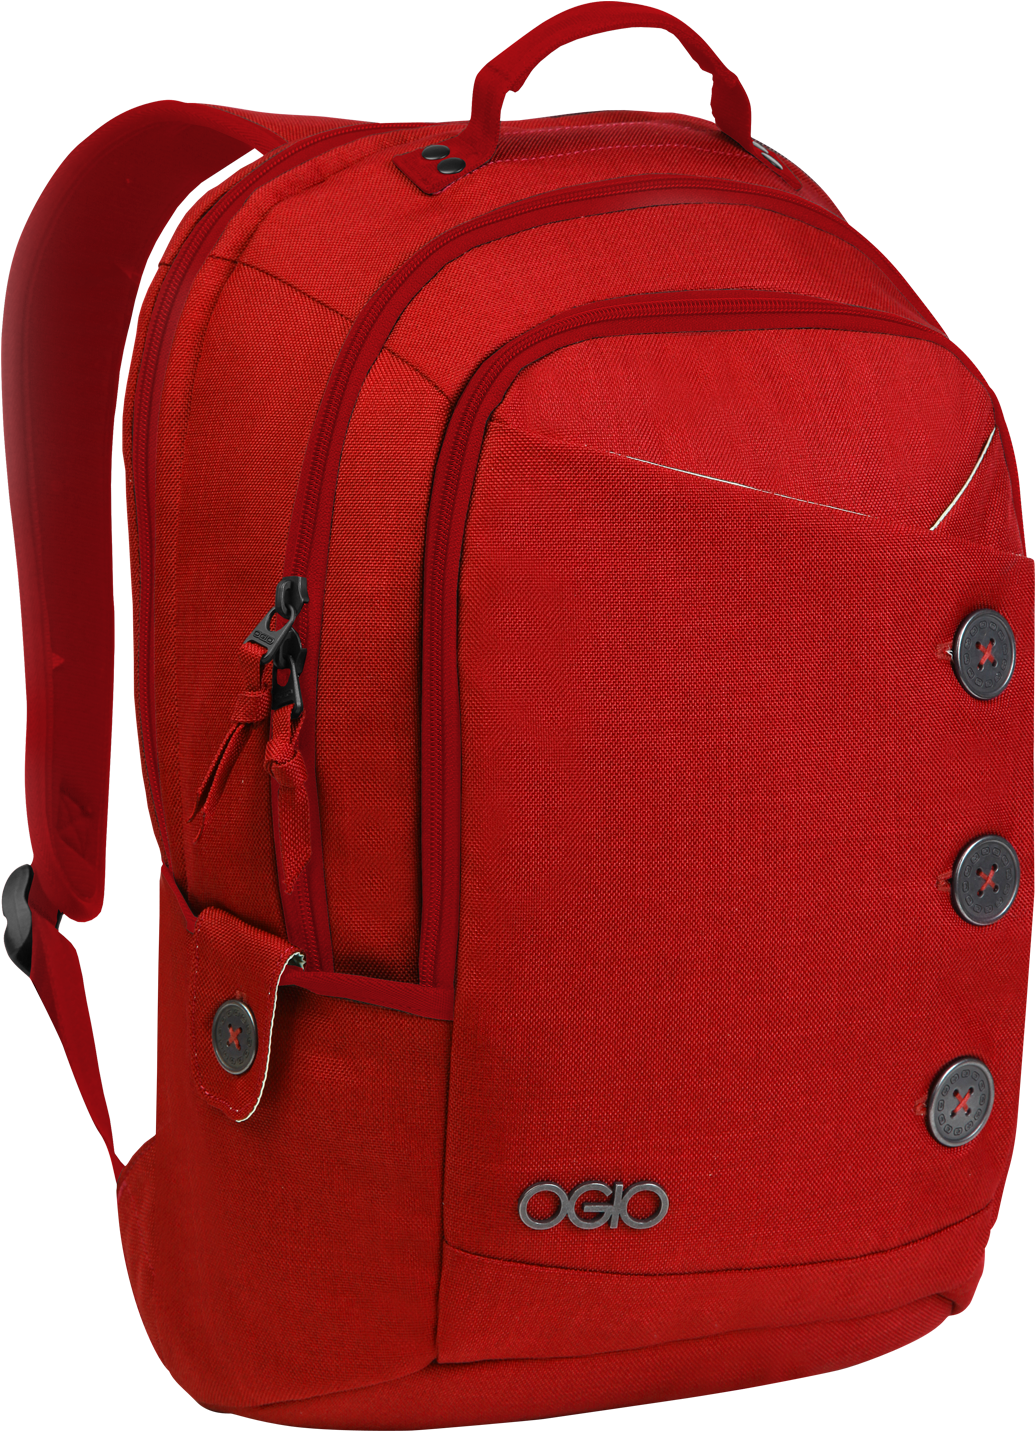 Red Backpack Png Image - Ogio Ladies Melrose Backpack Colors (1500x1500)